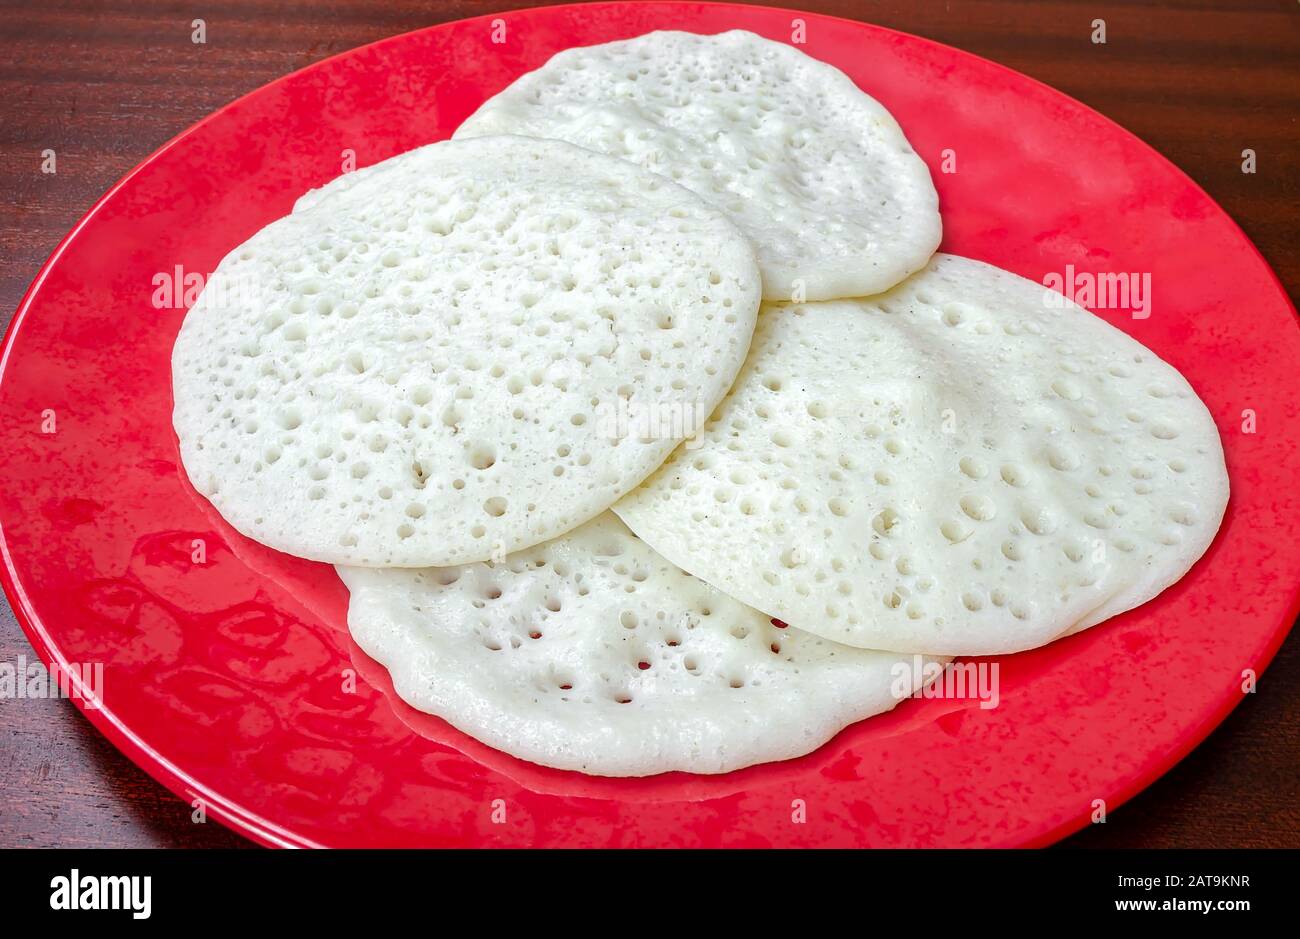 Kerala Special Appams in a red plate on a wooden table ready to be eaten. Stock Photo